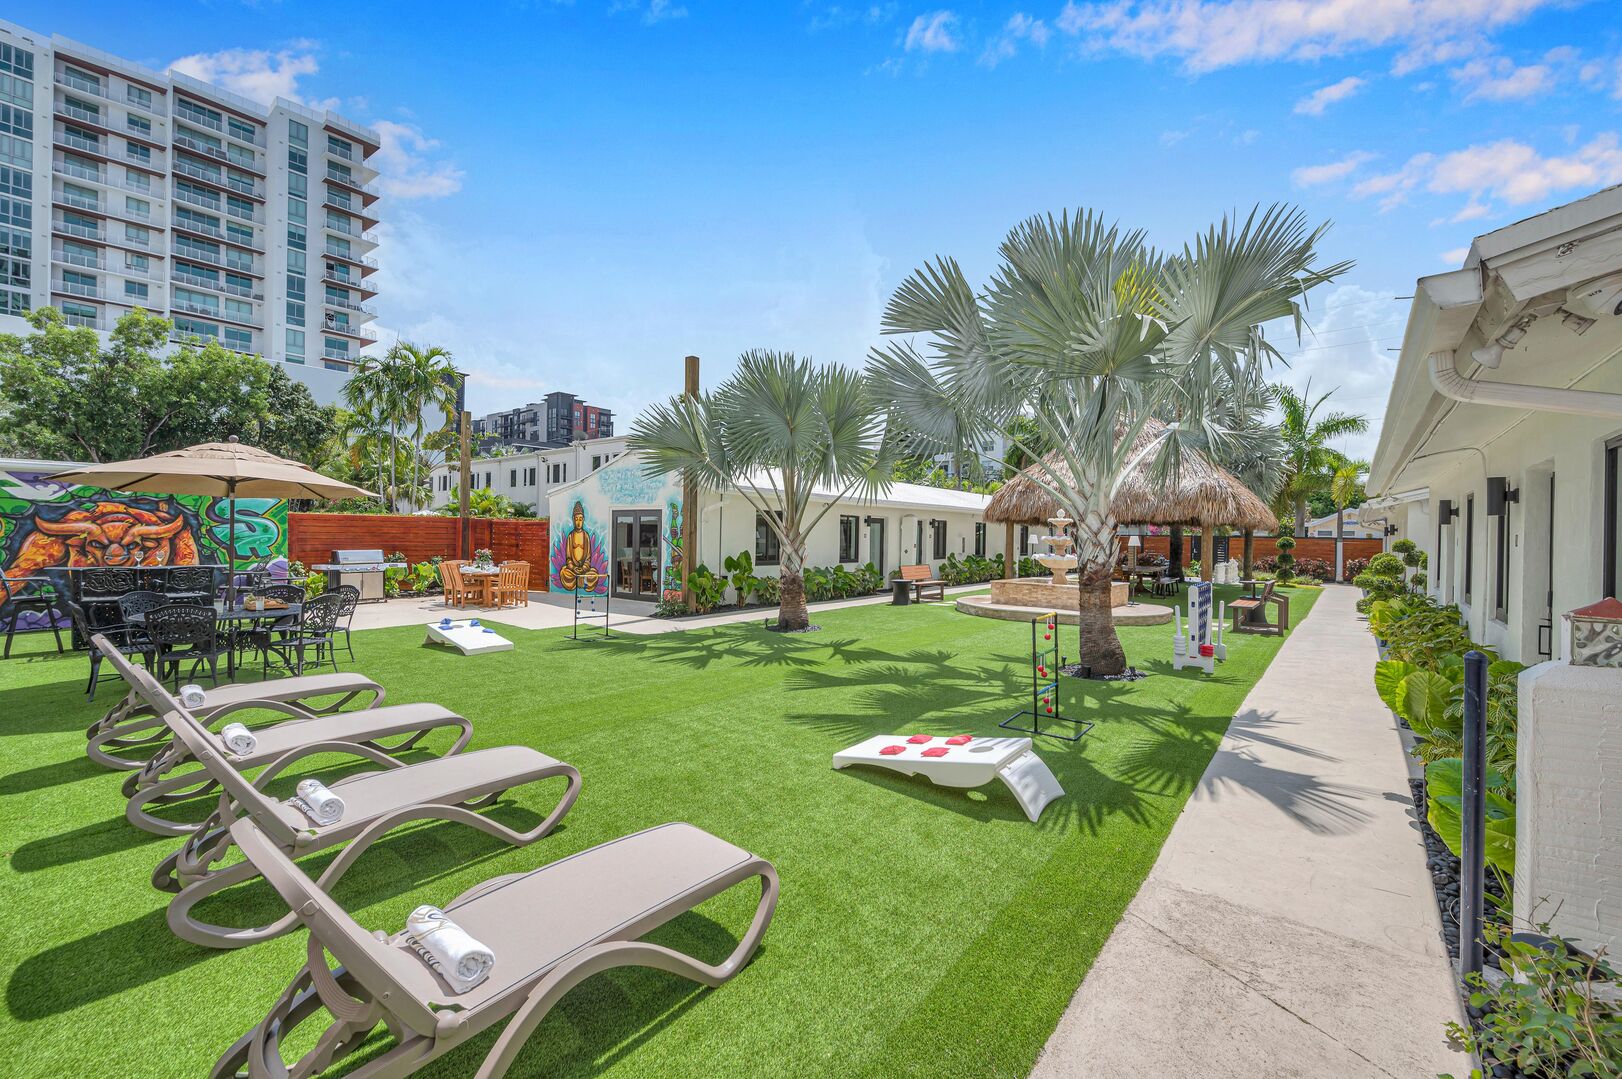 Suite Seven is one of seven suites surrounding a garden that features wall murals, a tiki gazebo, a giant chess board, mini golf, a hot tub, a grill, as well as many lounging and dining areas.